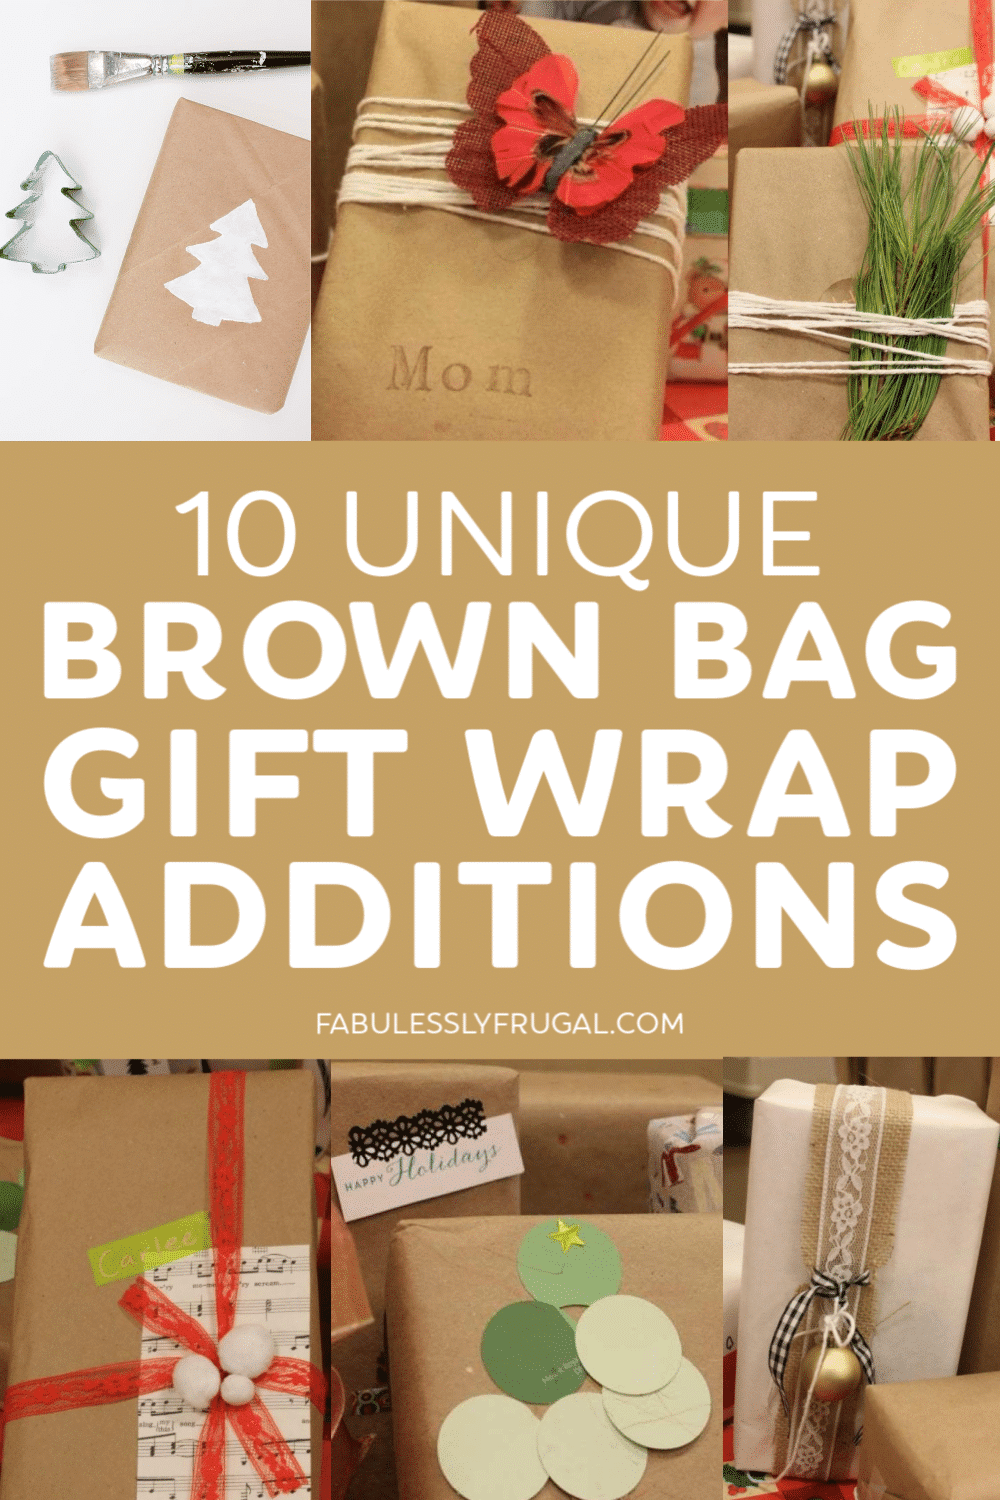 Brown bag gift wrapping ideas